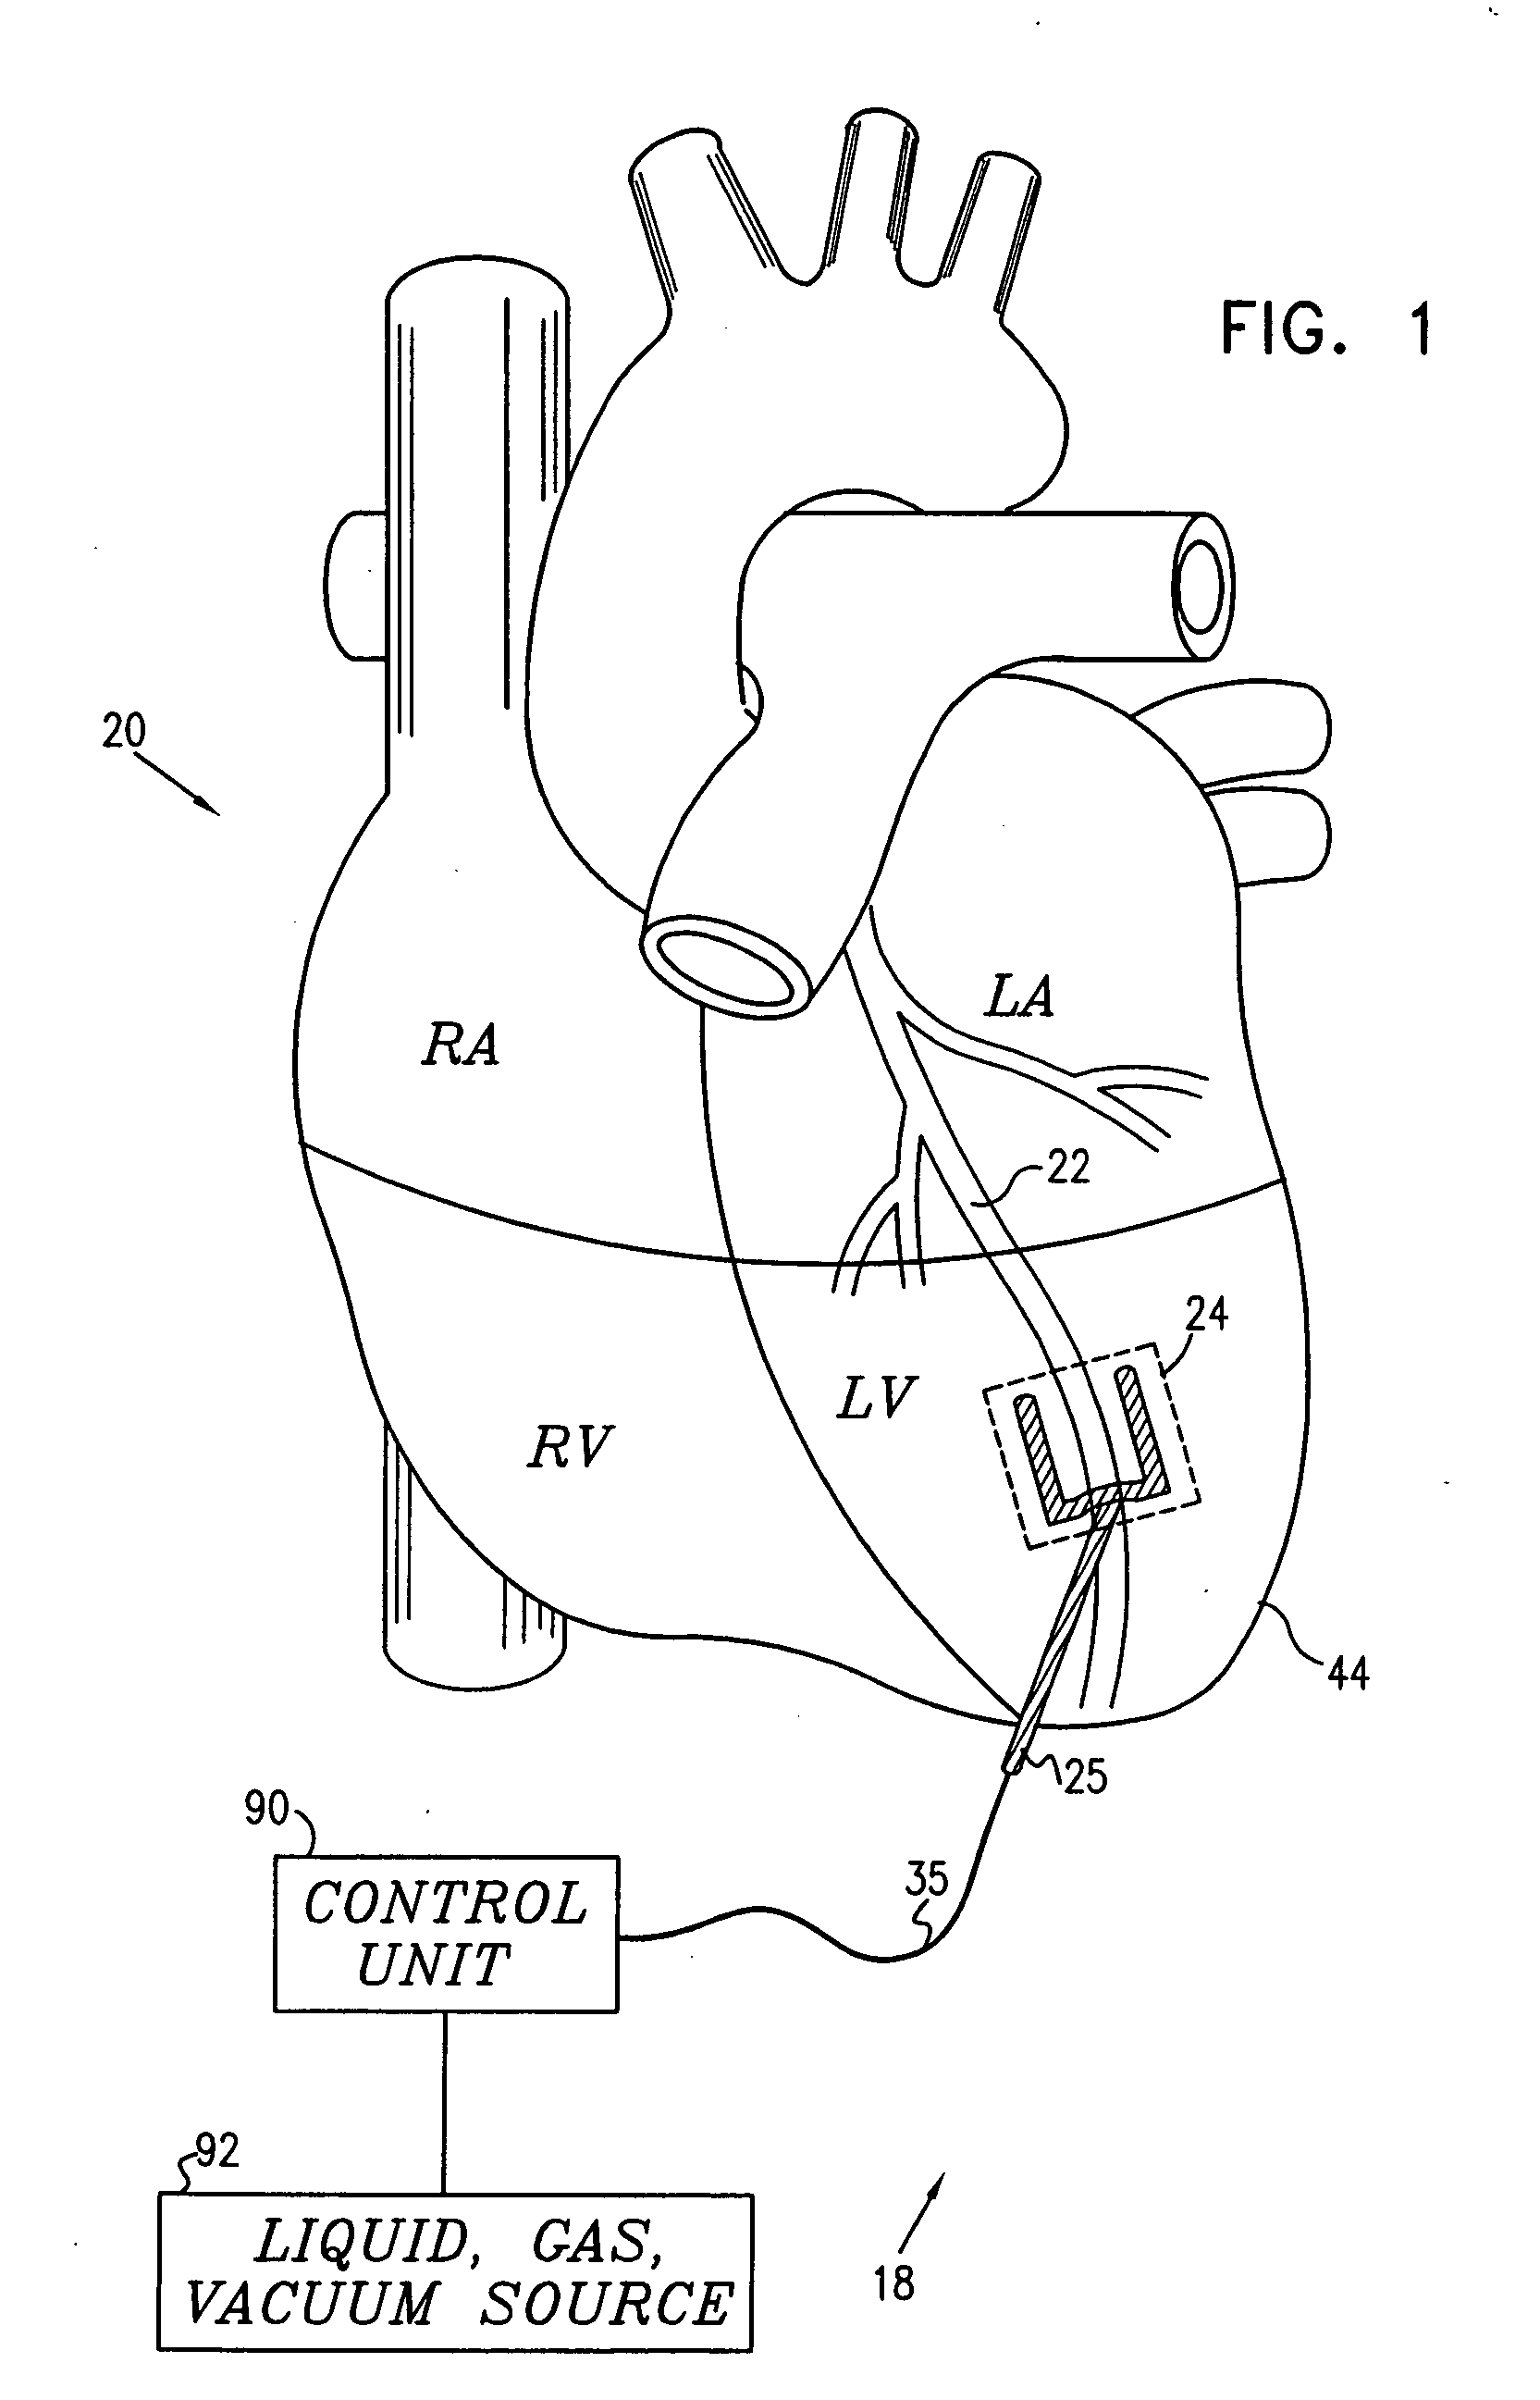 Local cardiac motion control using applied signals and mechanical force